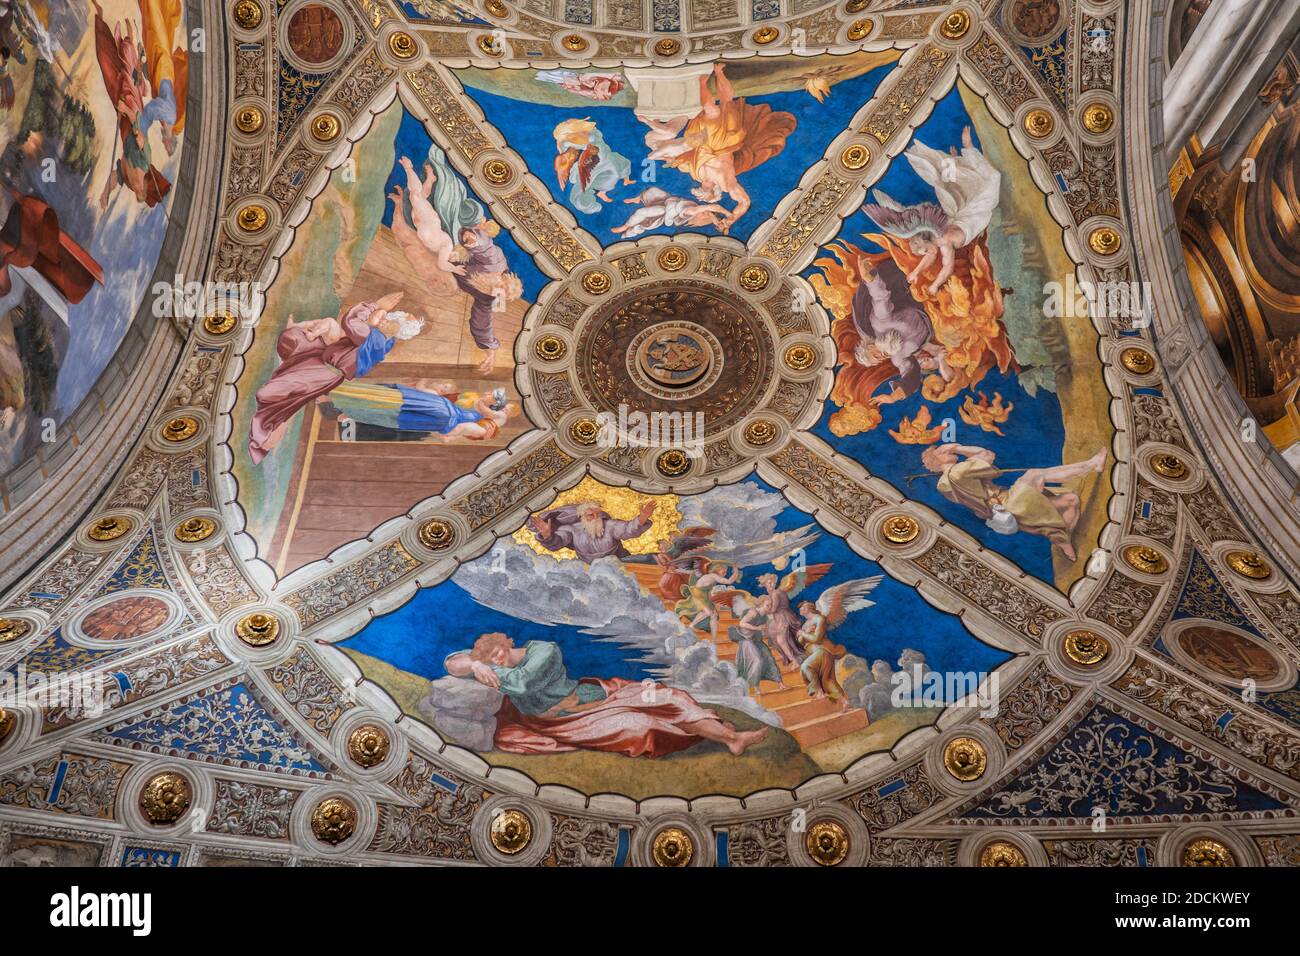 Room of Heliodorus ceiling paintings by Luca Signorelli, Bramantino, Lorenzo Lotto and Cesare da Sesto, Raphael Rooms, Vatican Museums, Rome, Italy Stock Photo